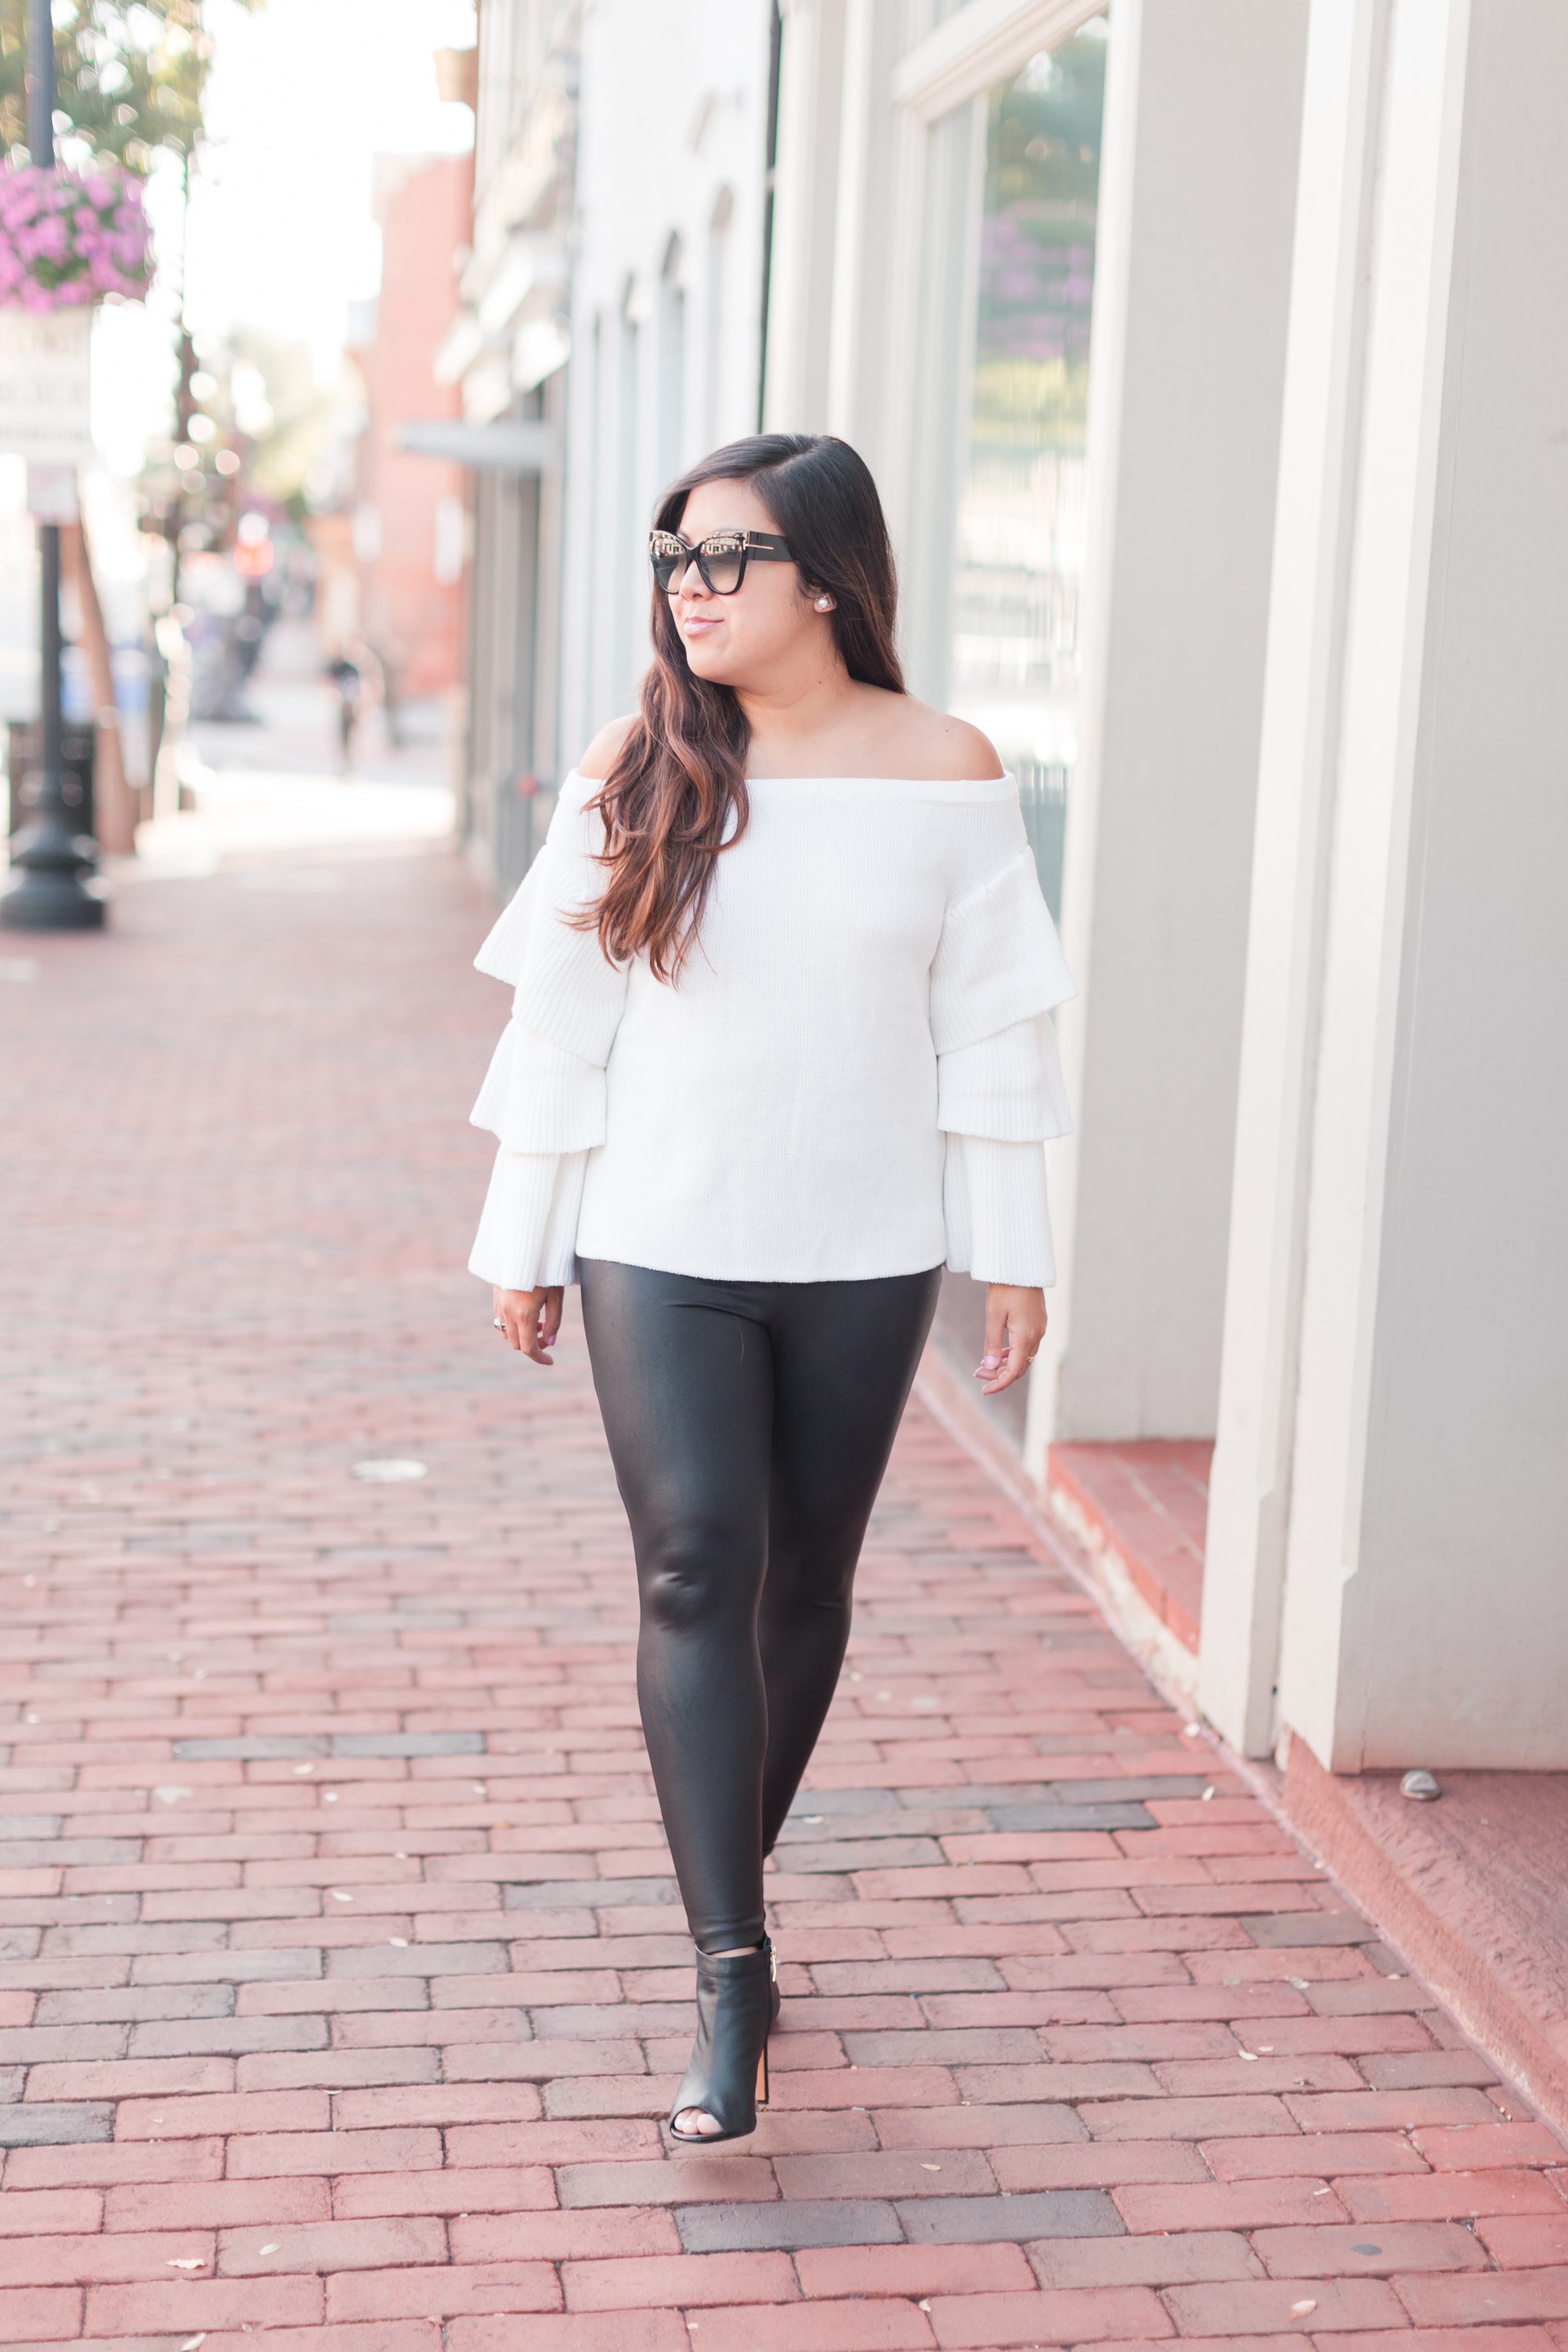 Off The Shoulder Sweater - Stylista Esquire - @stylistaesquire